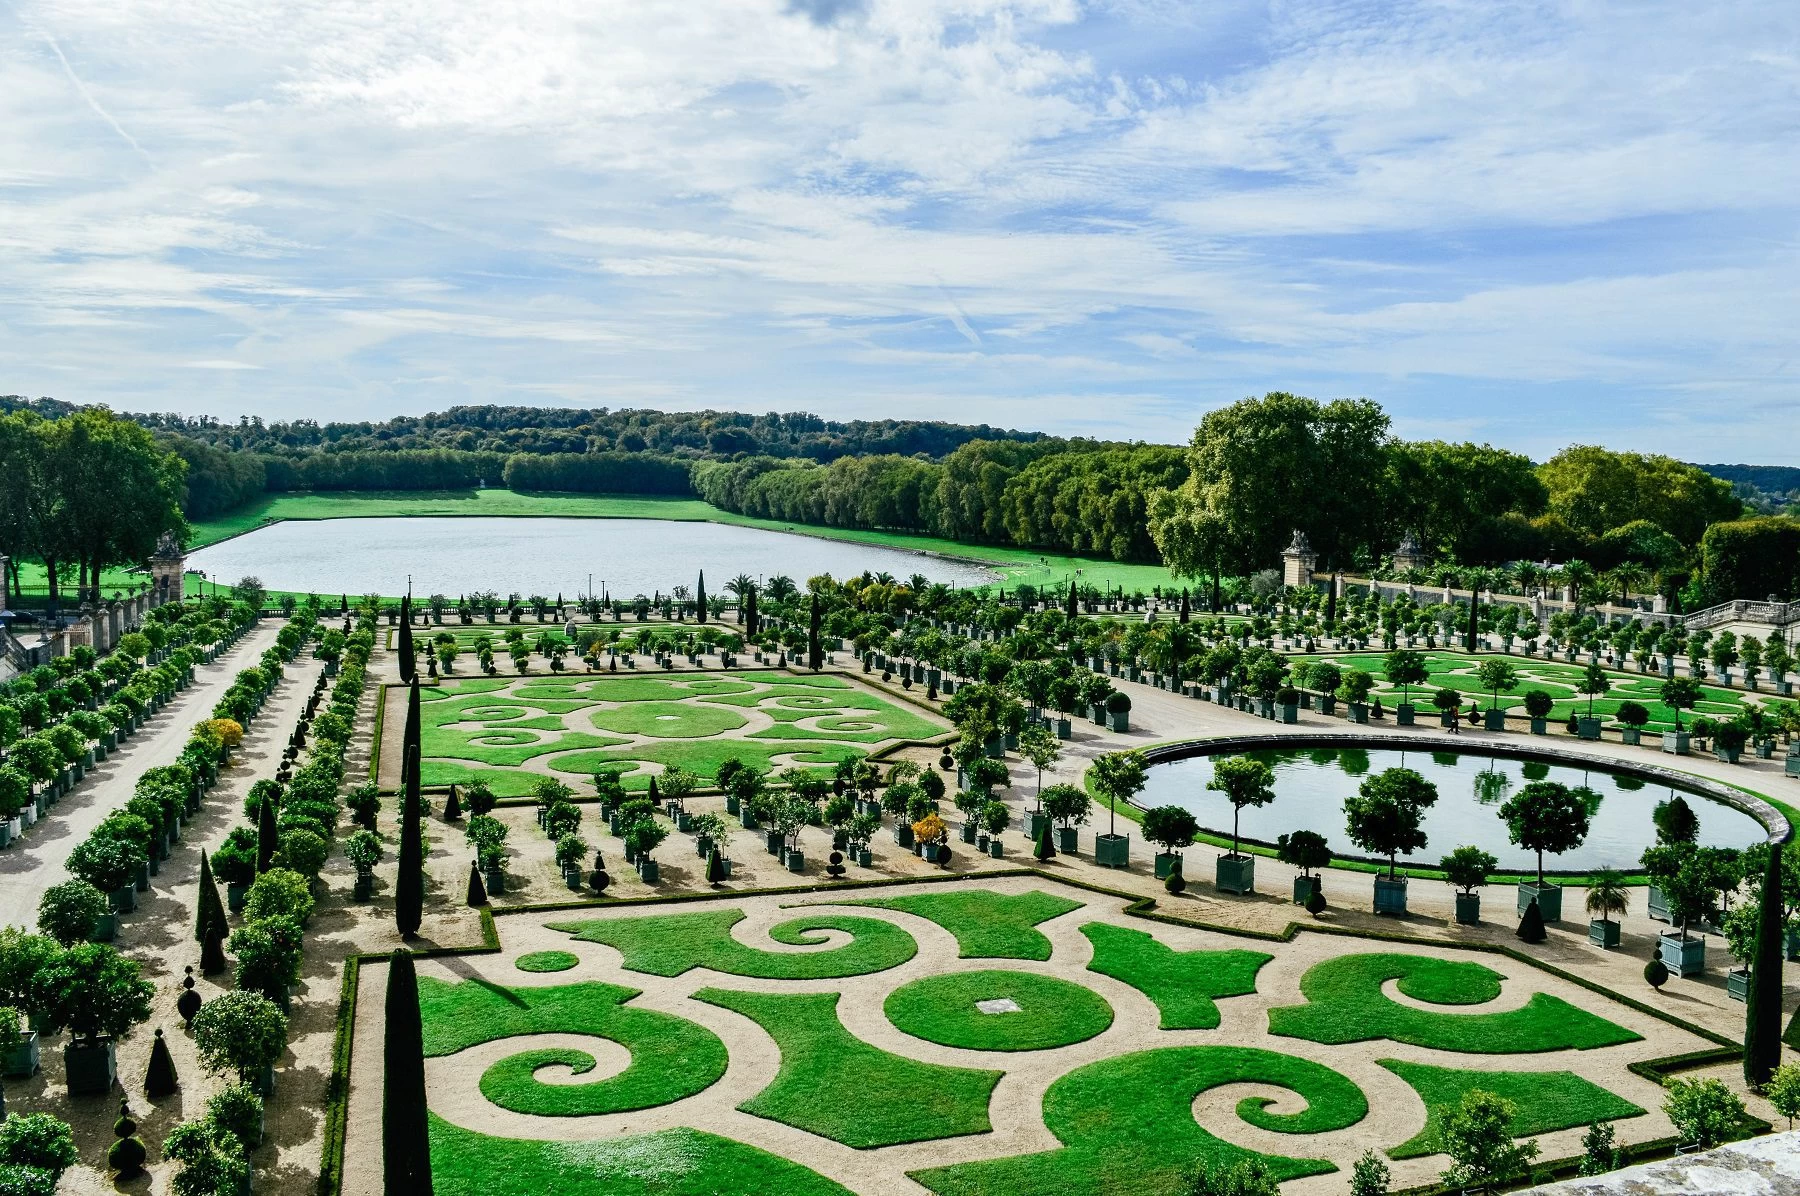 Visiting the garden of Versailles in the fall